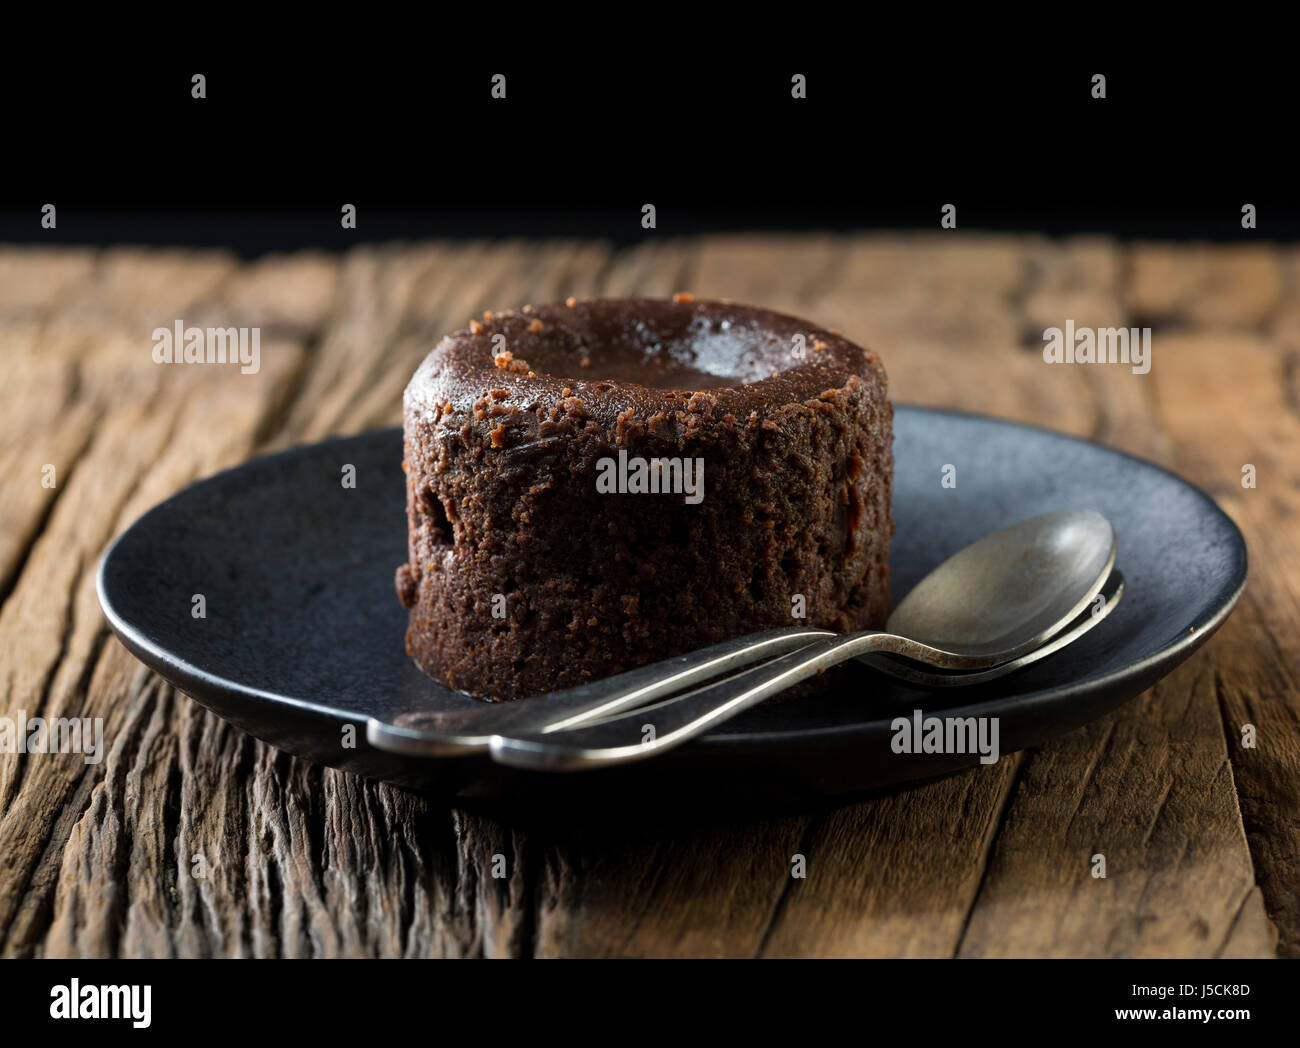 Homemade Chocolate Lava Cake. Chocolate pudding sitting on a rustic wooden table. Stock Photo